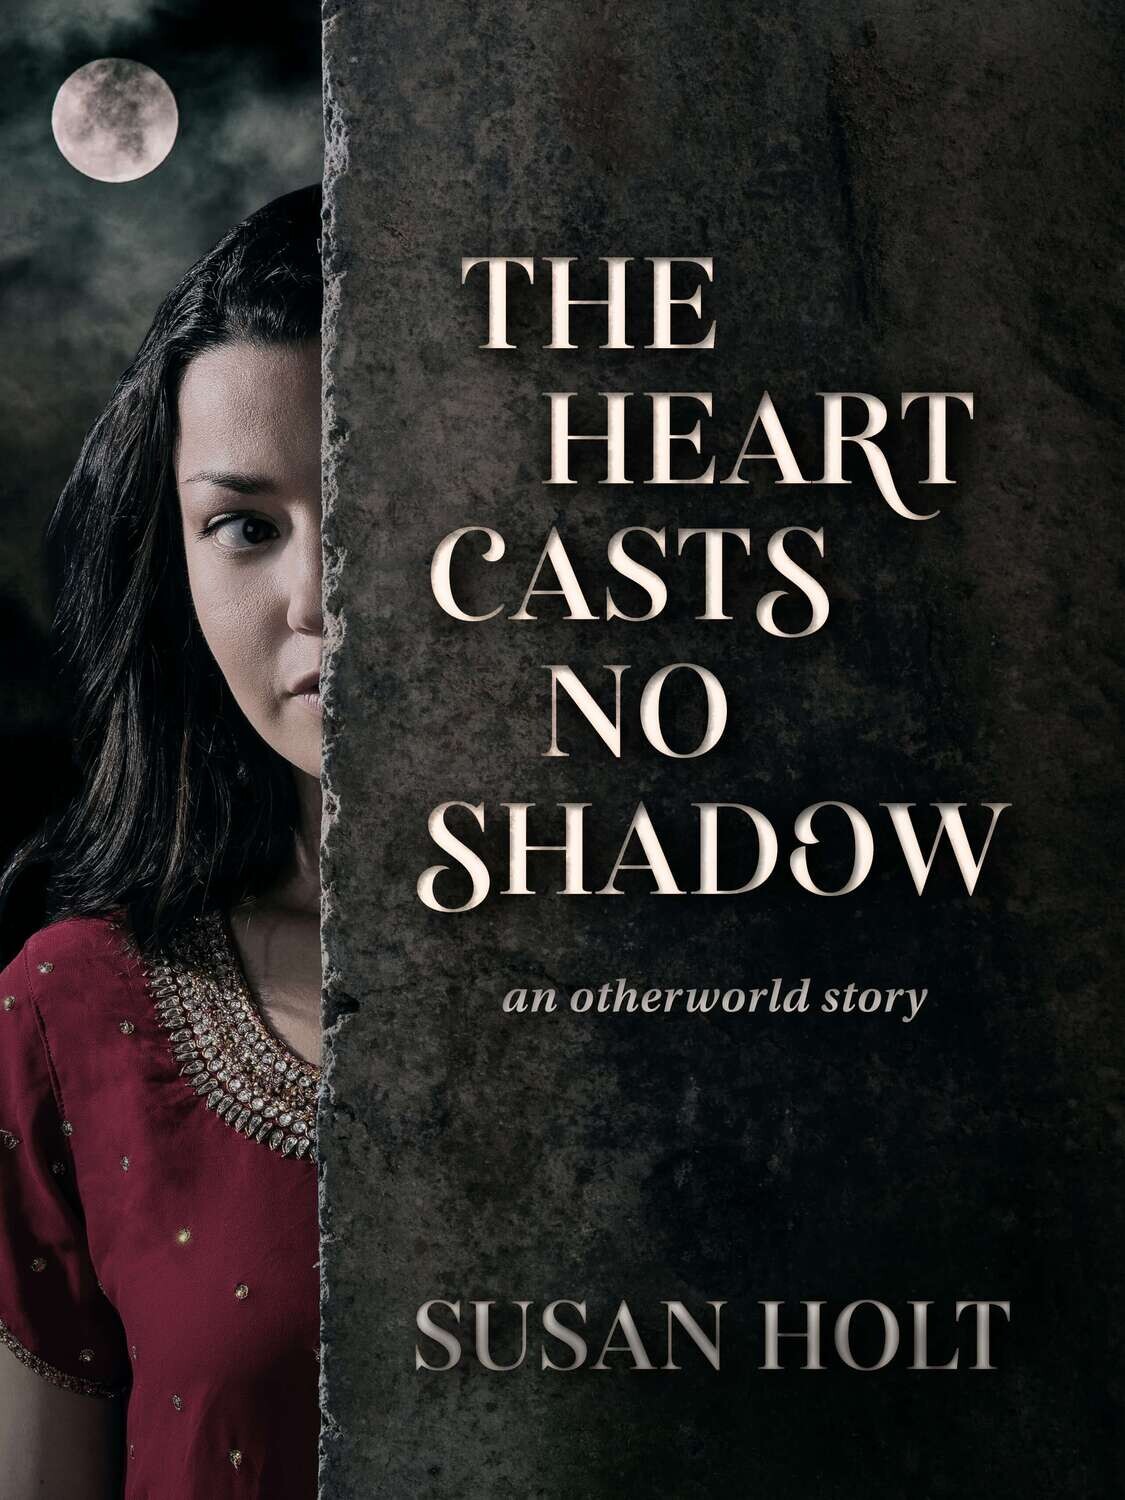 The Heart Casts No Shadow: An Otherworld Story